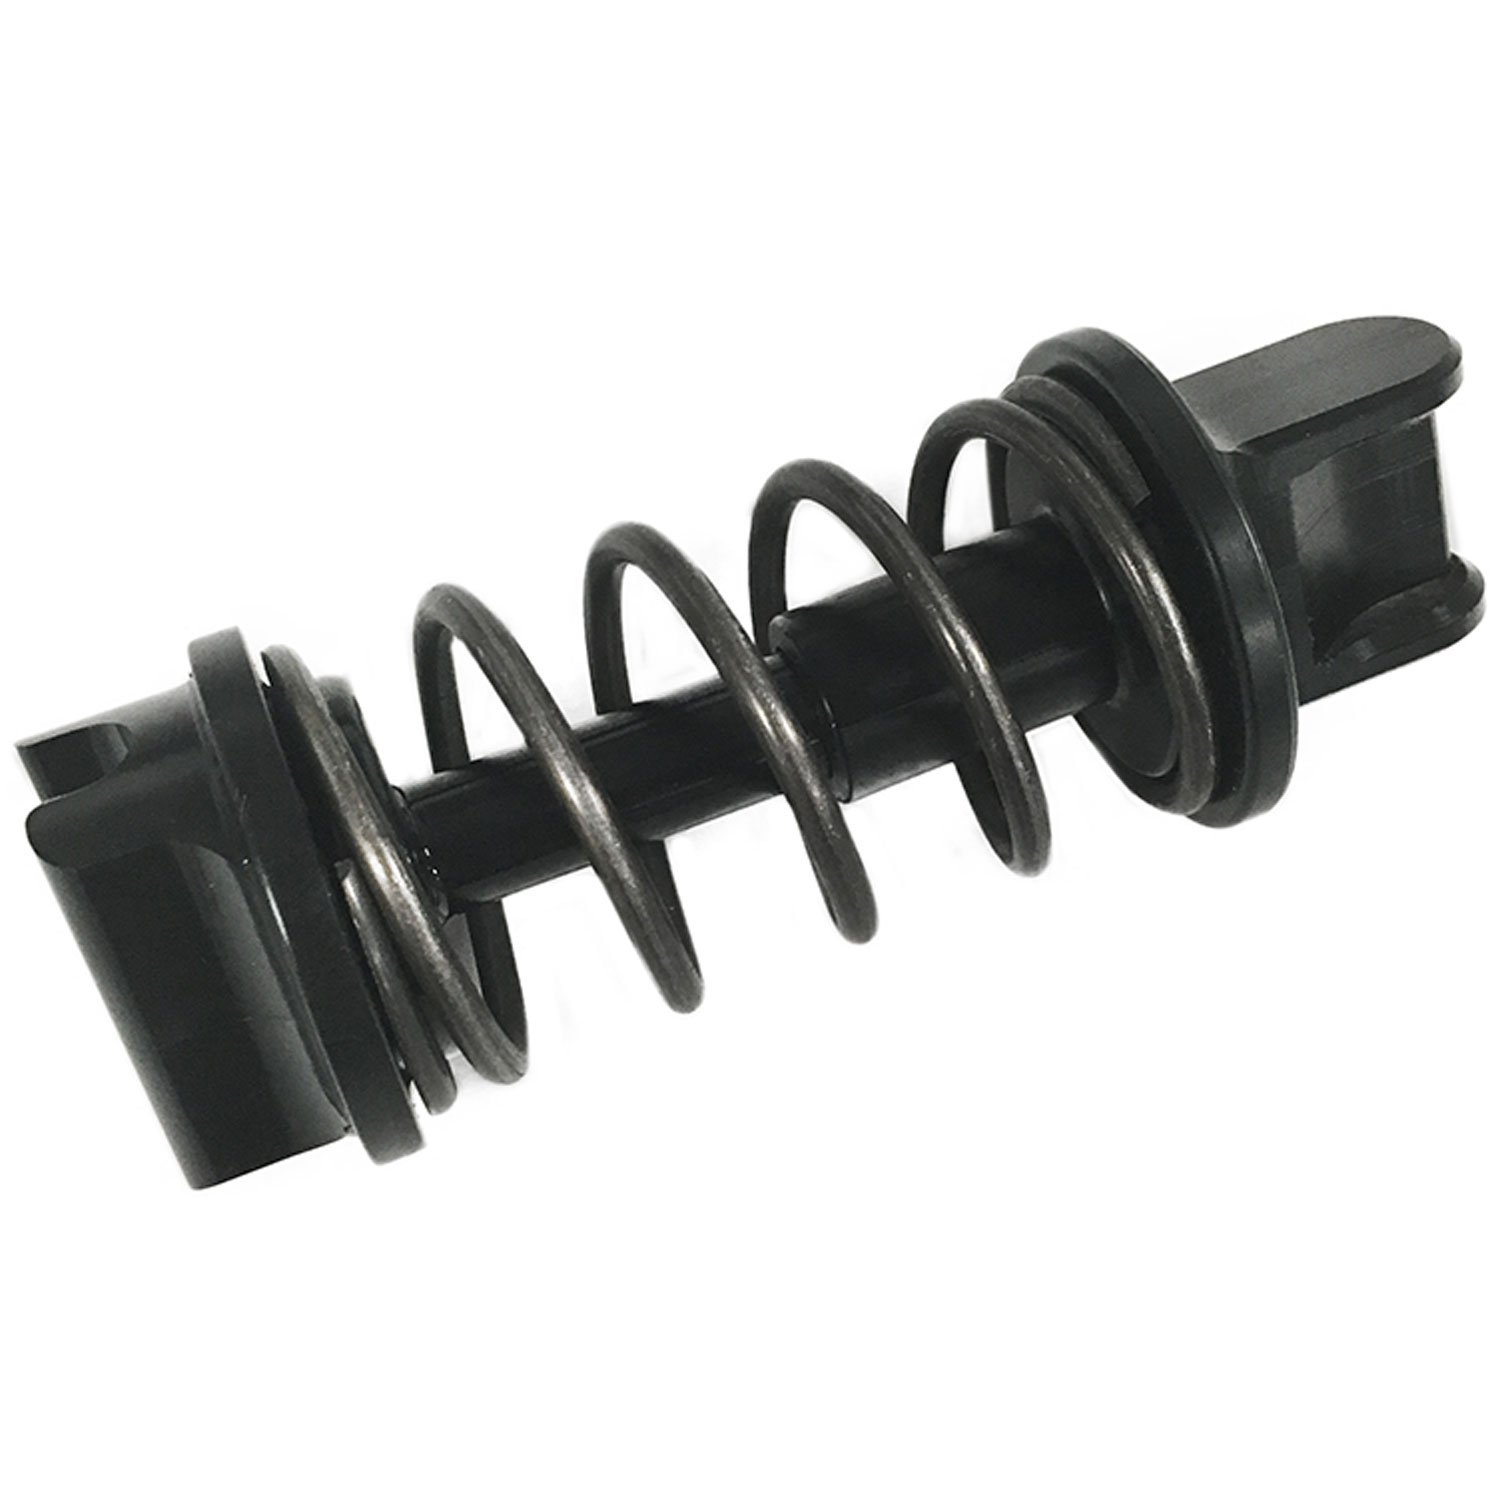 Clutch Assist Spring and Perch Kit